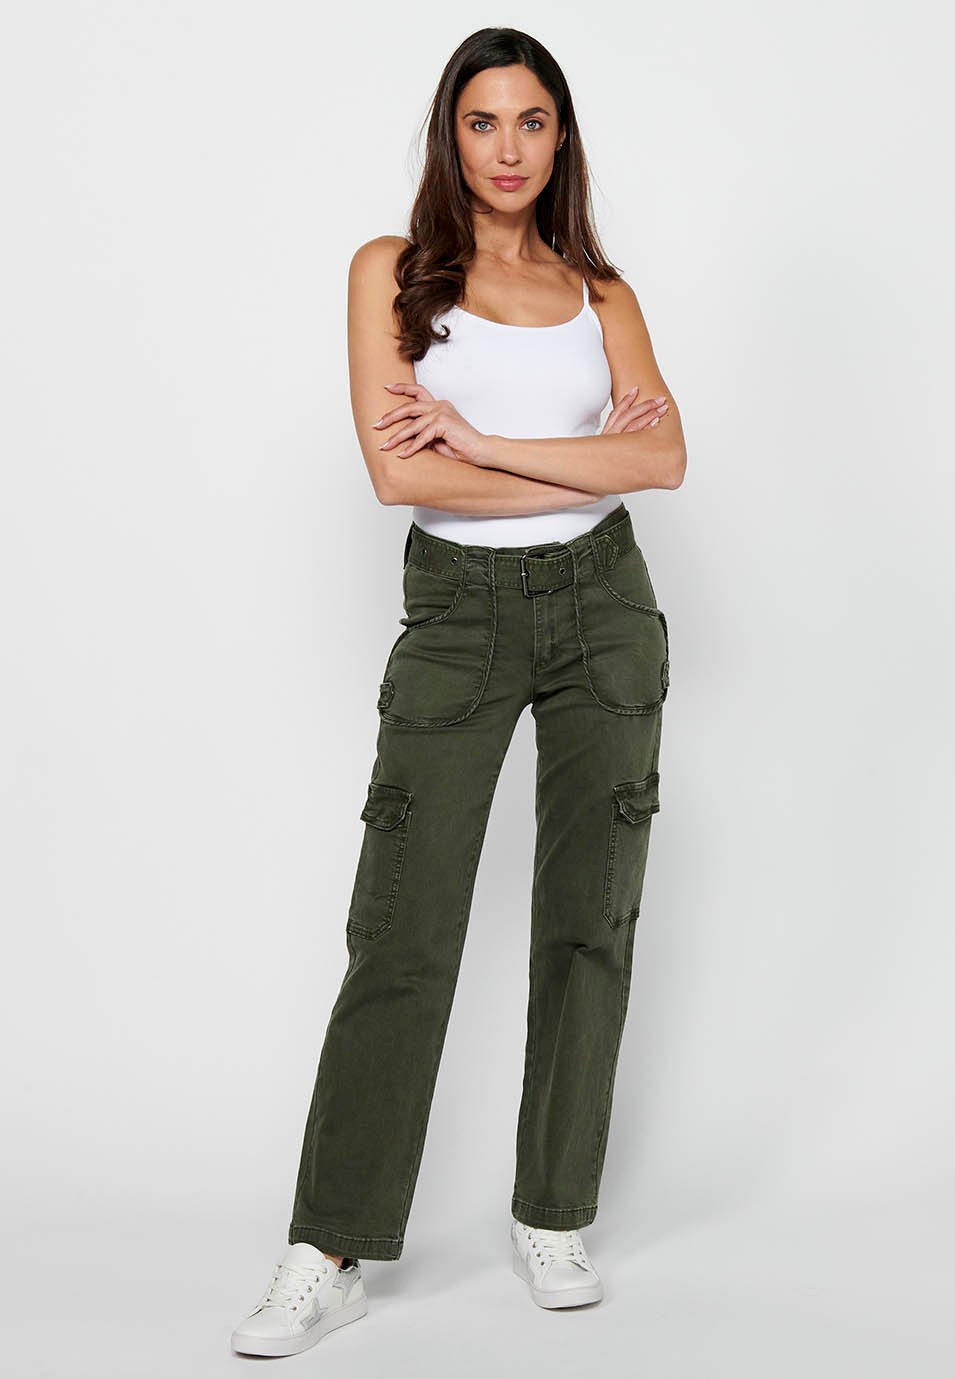 Long straight-cut pants with front zipper closure and button with patch pockets in Khaki Color for Women